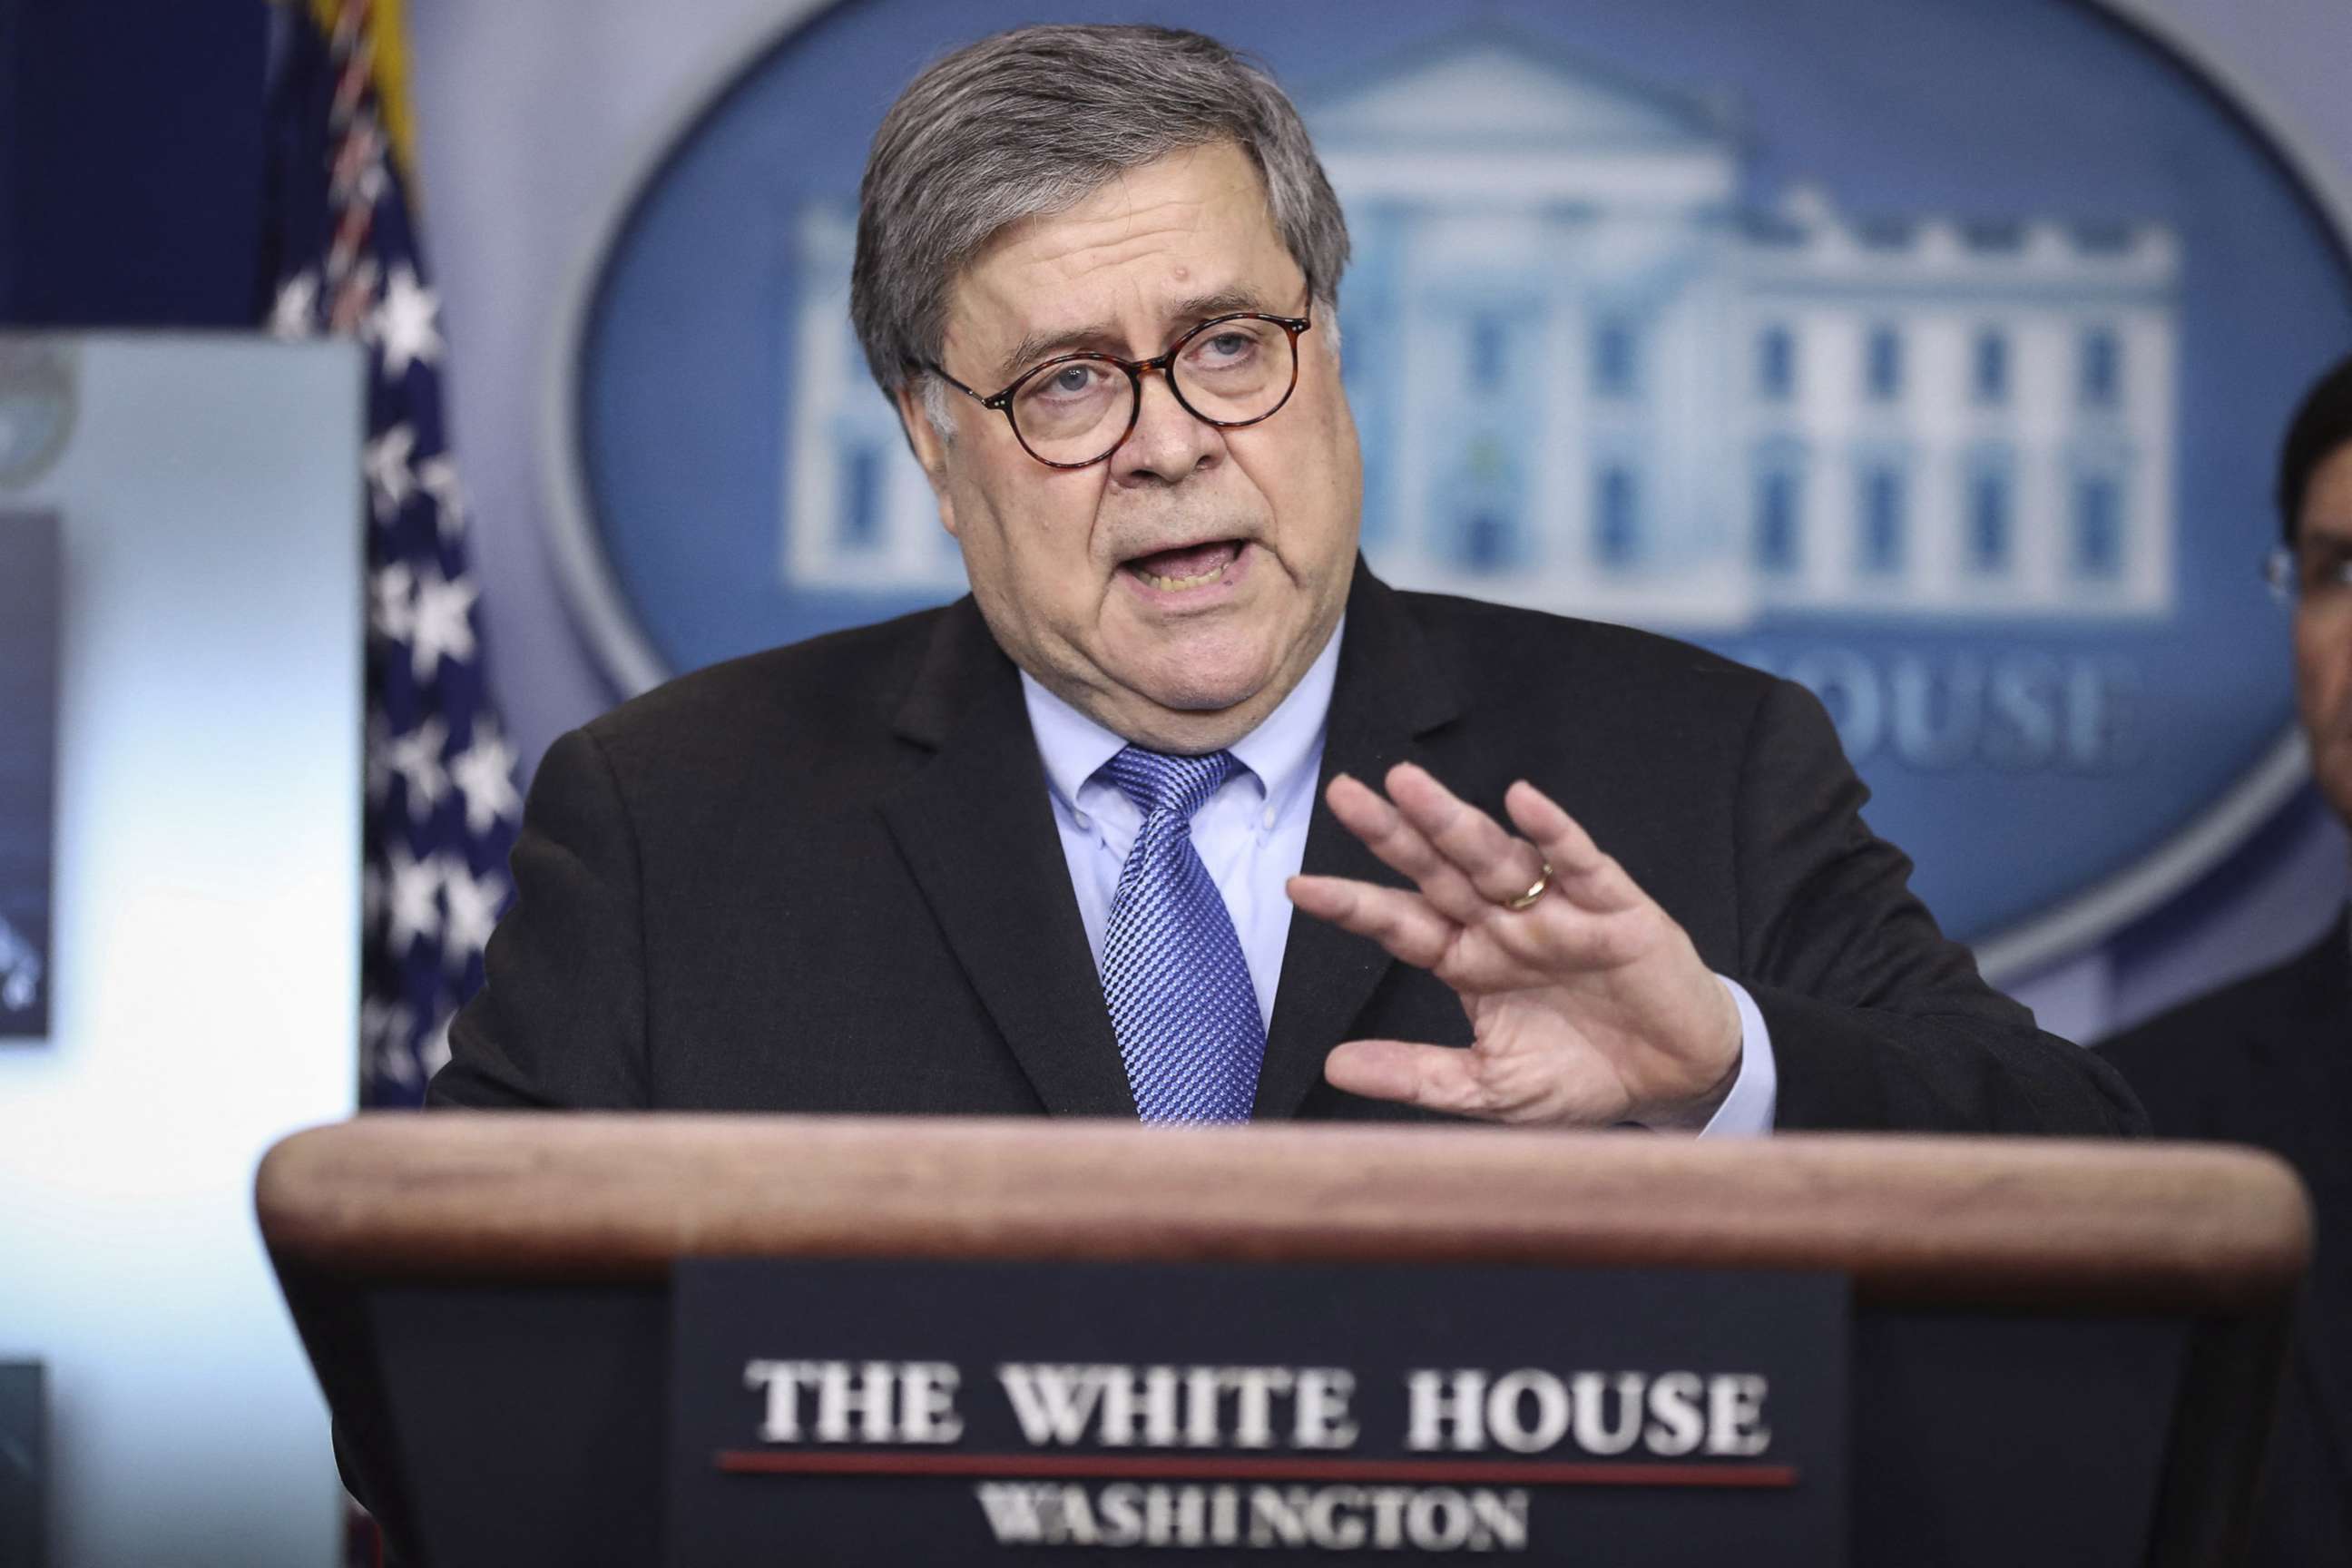 PHOTO: Attorney General William Barr speaks during a press conference in the Brady Press Briefing Room of the White House on April 1, 2020, in Washington, DC.